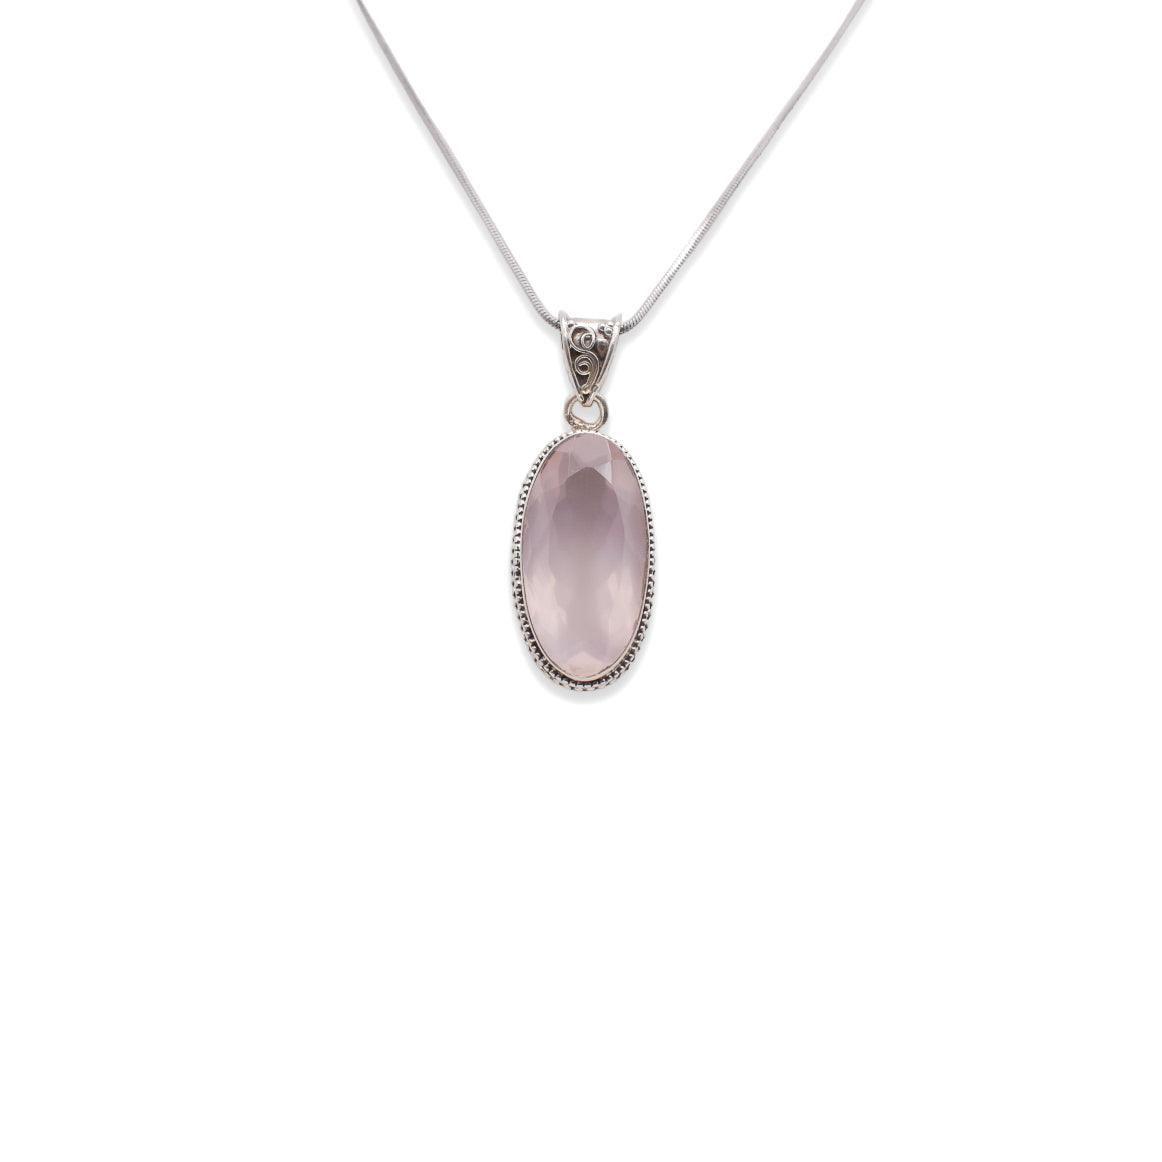 hanging 925 Sterling Silver Rose Quartz pink colored Pendant front angle with chain on white background